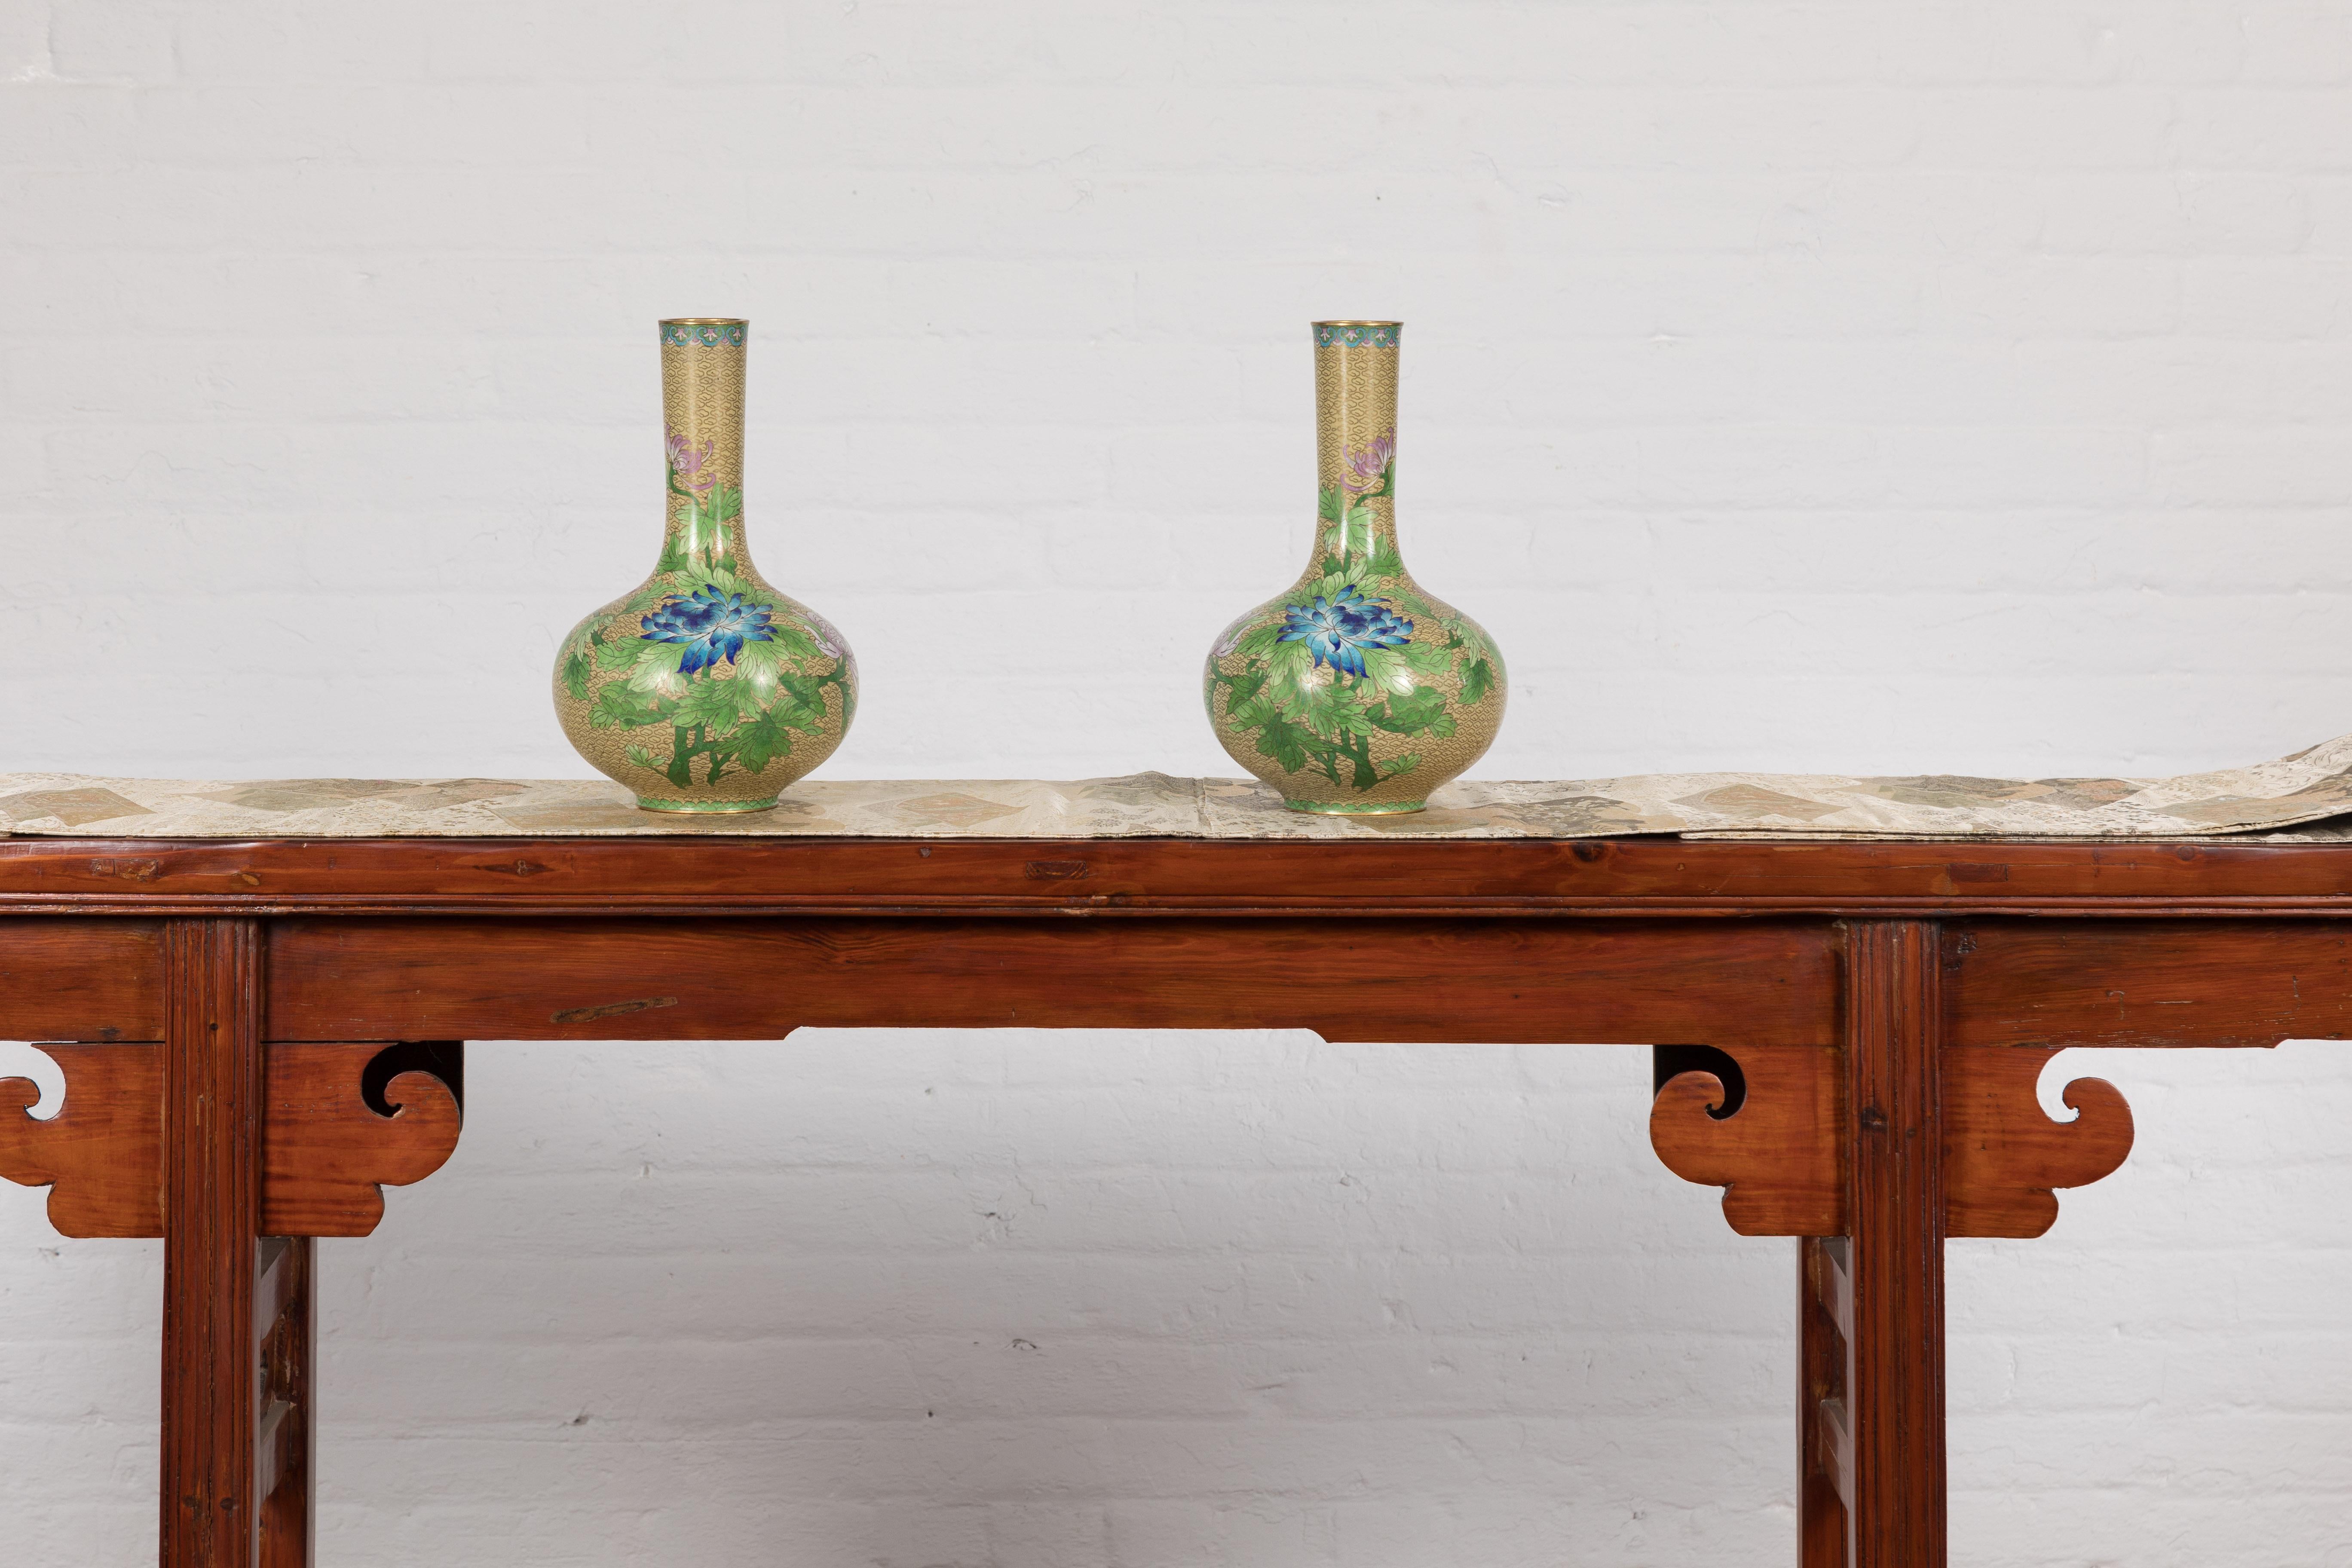 A vintage pair of Chinese vases from the mid 20th century with floral cloisonné décor. Welcome to a symphony of color and craftsmanship, presented by this vintage pair of Chinese vases that hail from the mid-20th century. A treasure for collectors